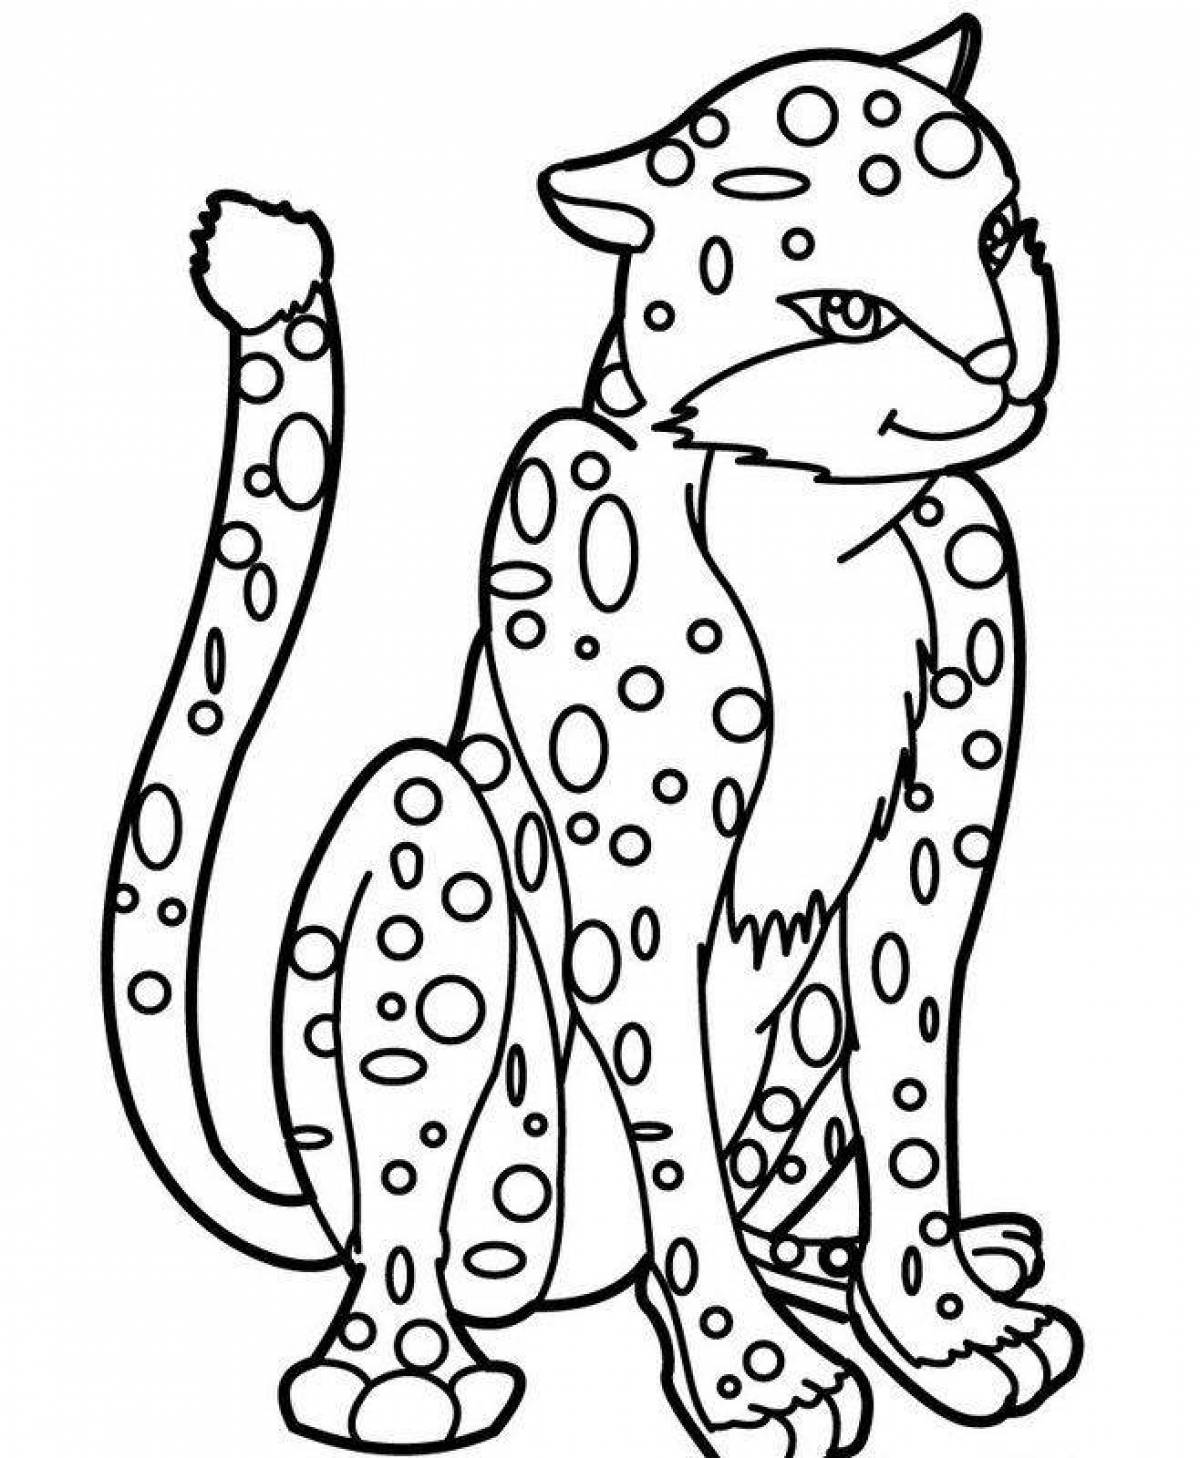 Amazing animal coloring pages for 10 year olds